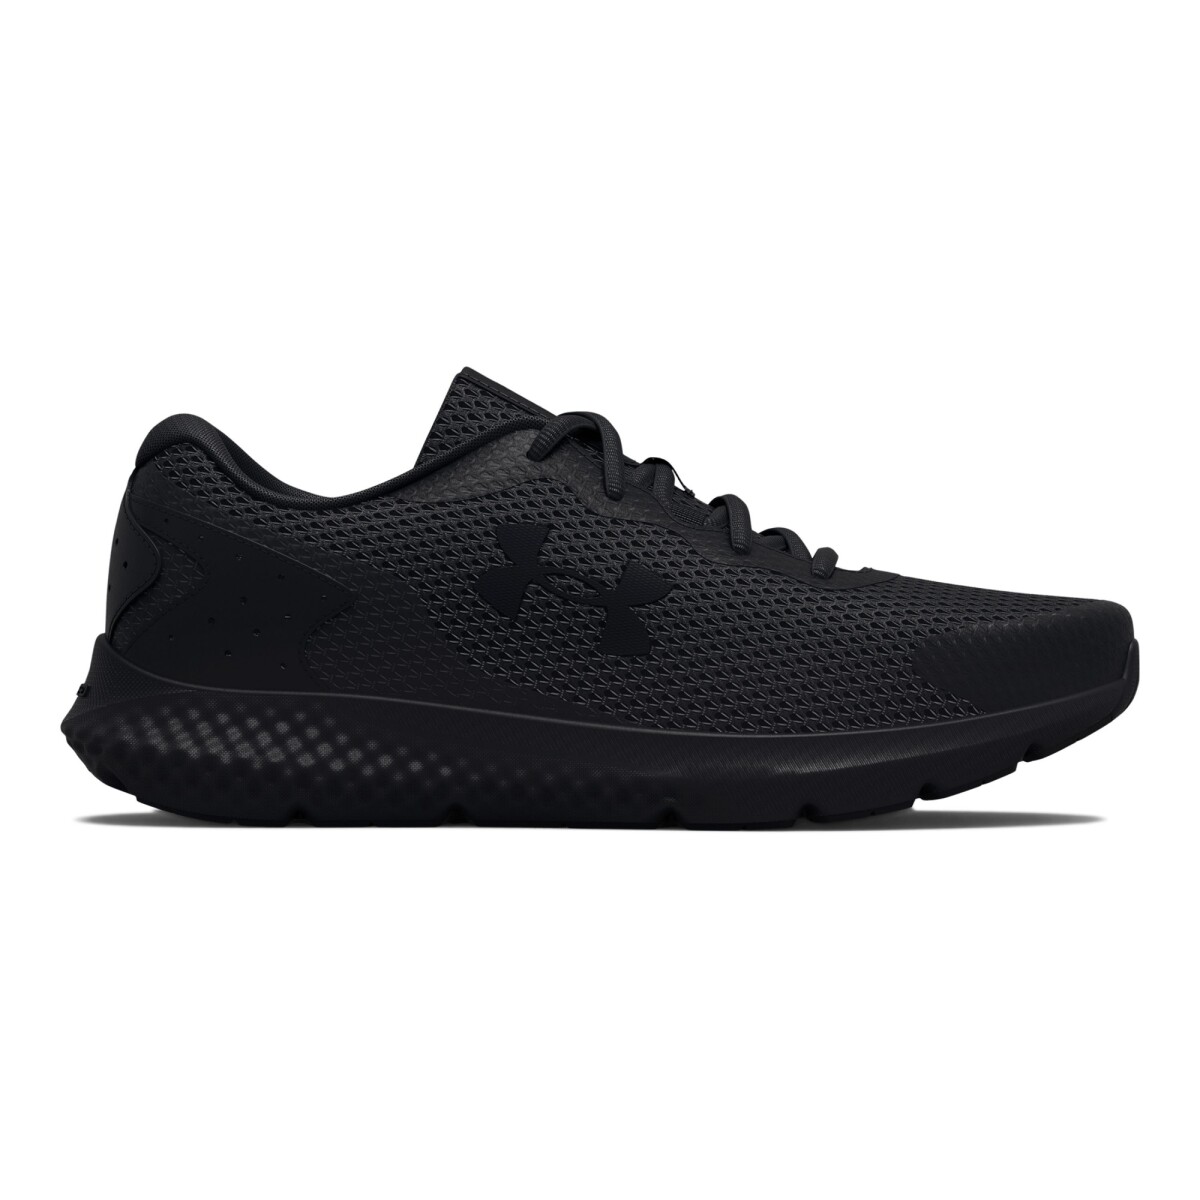 Championes Under Armour Charged Rogue 3 - NEGRO 